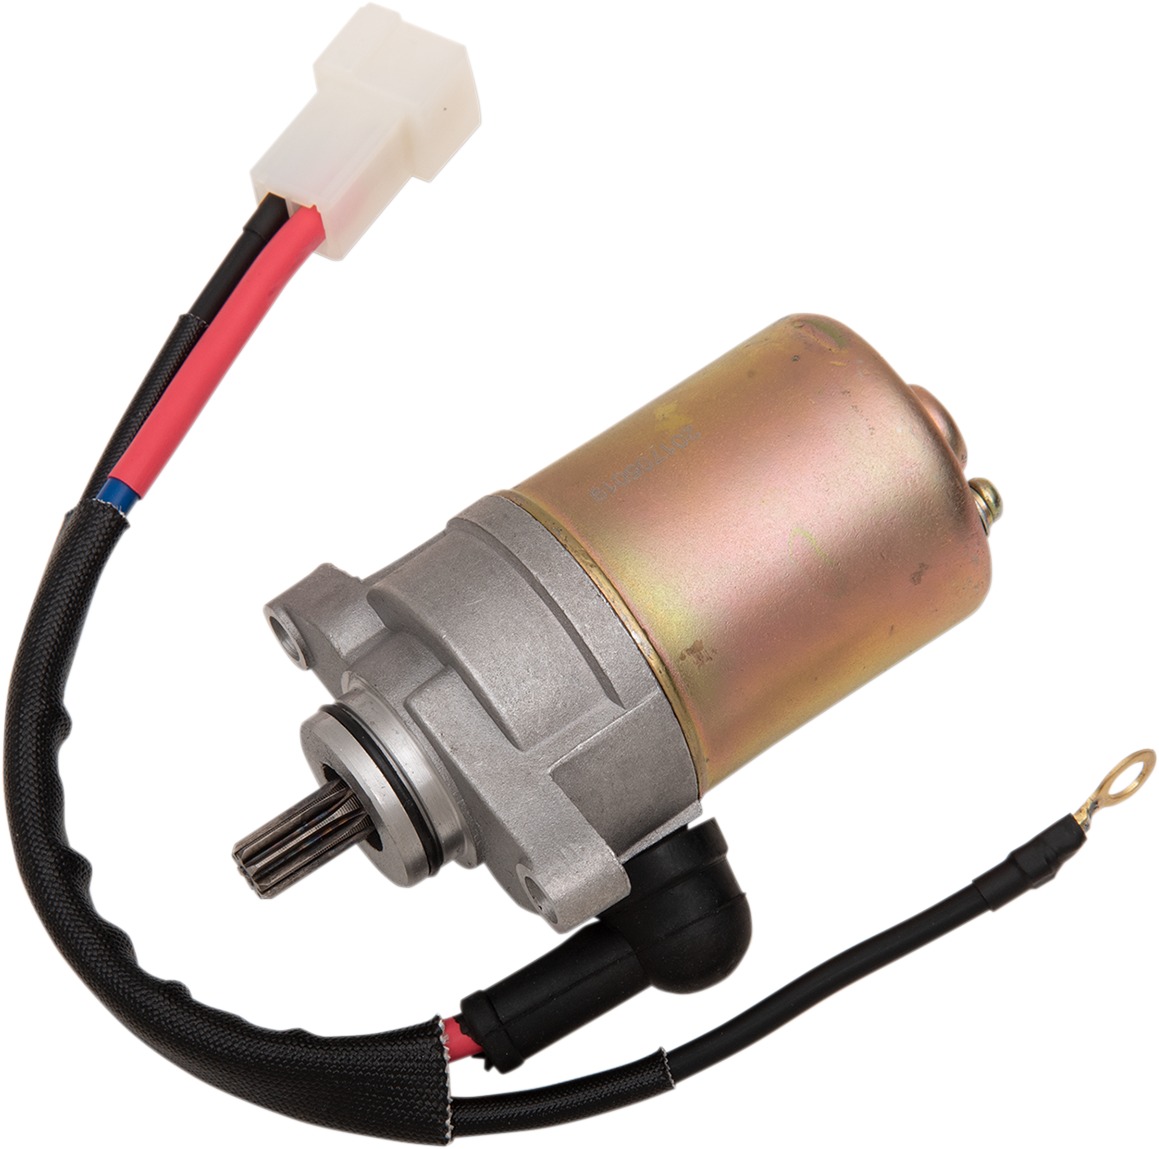 Replacement Starter Motor - For 08-18 Polaris Outlaw 50 2007 Predator 50 - Click Image to Close